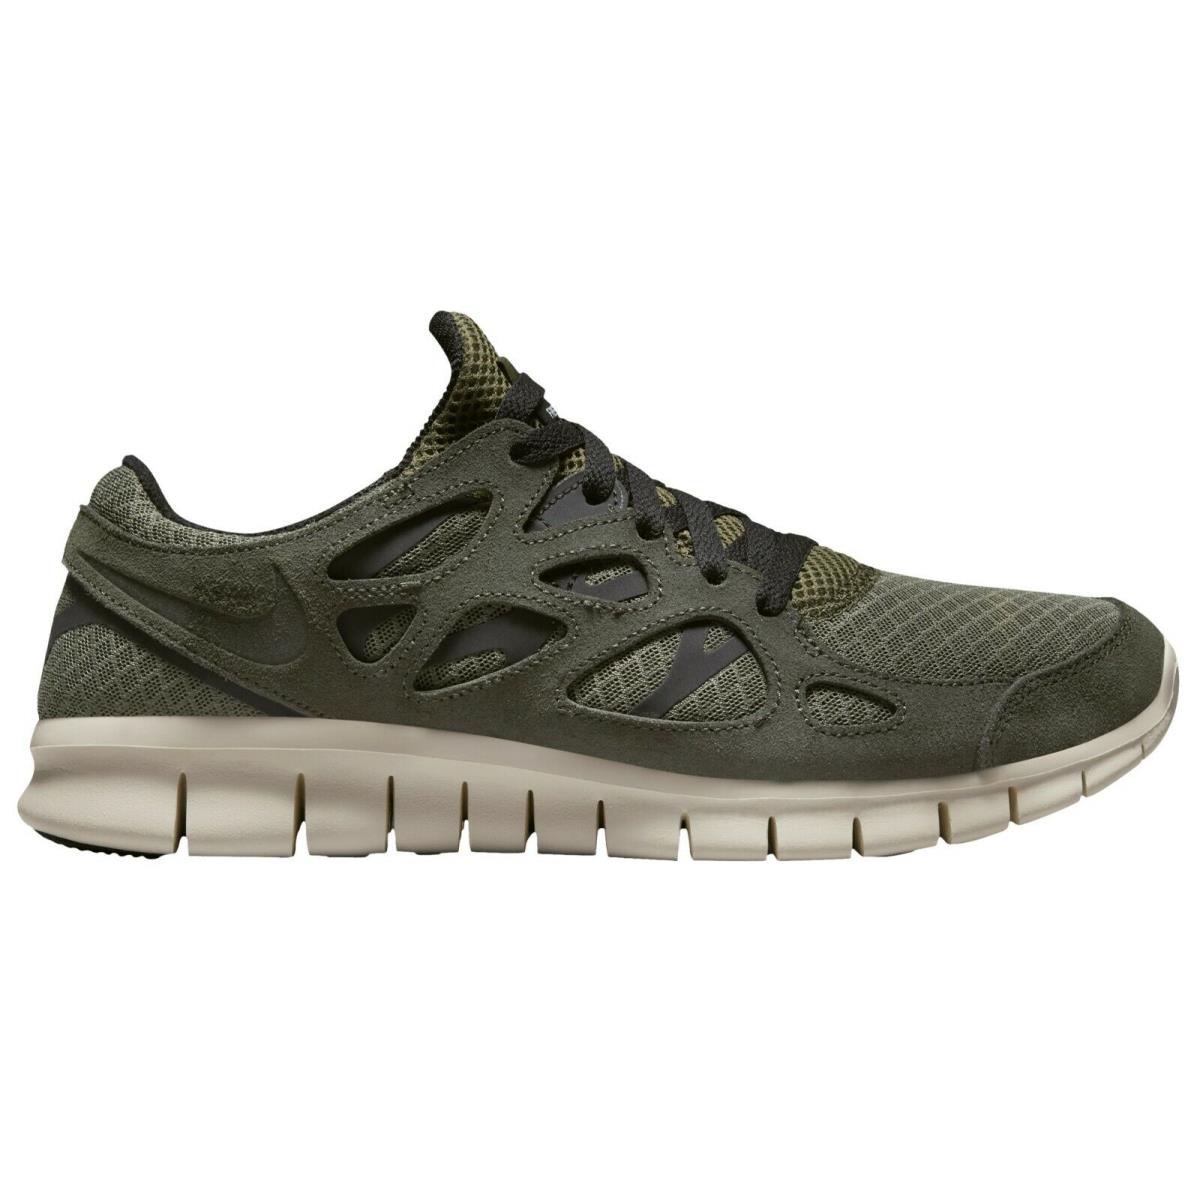 Nike Free Run 2 Mens 537732-305 Sequoia Olive Sail Black Running Shoes Size 10